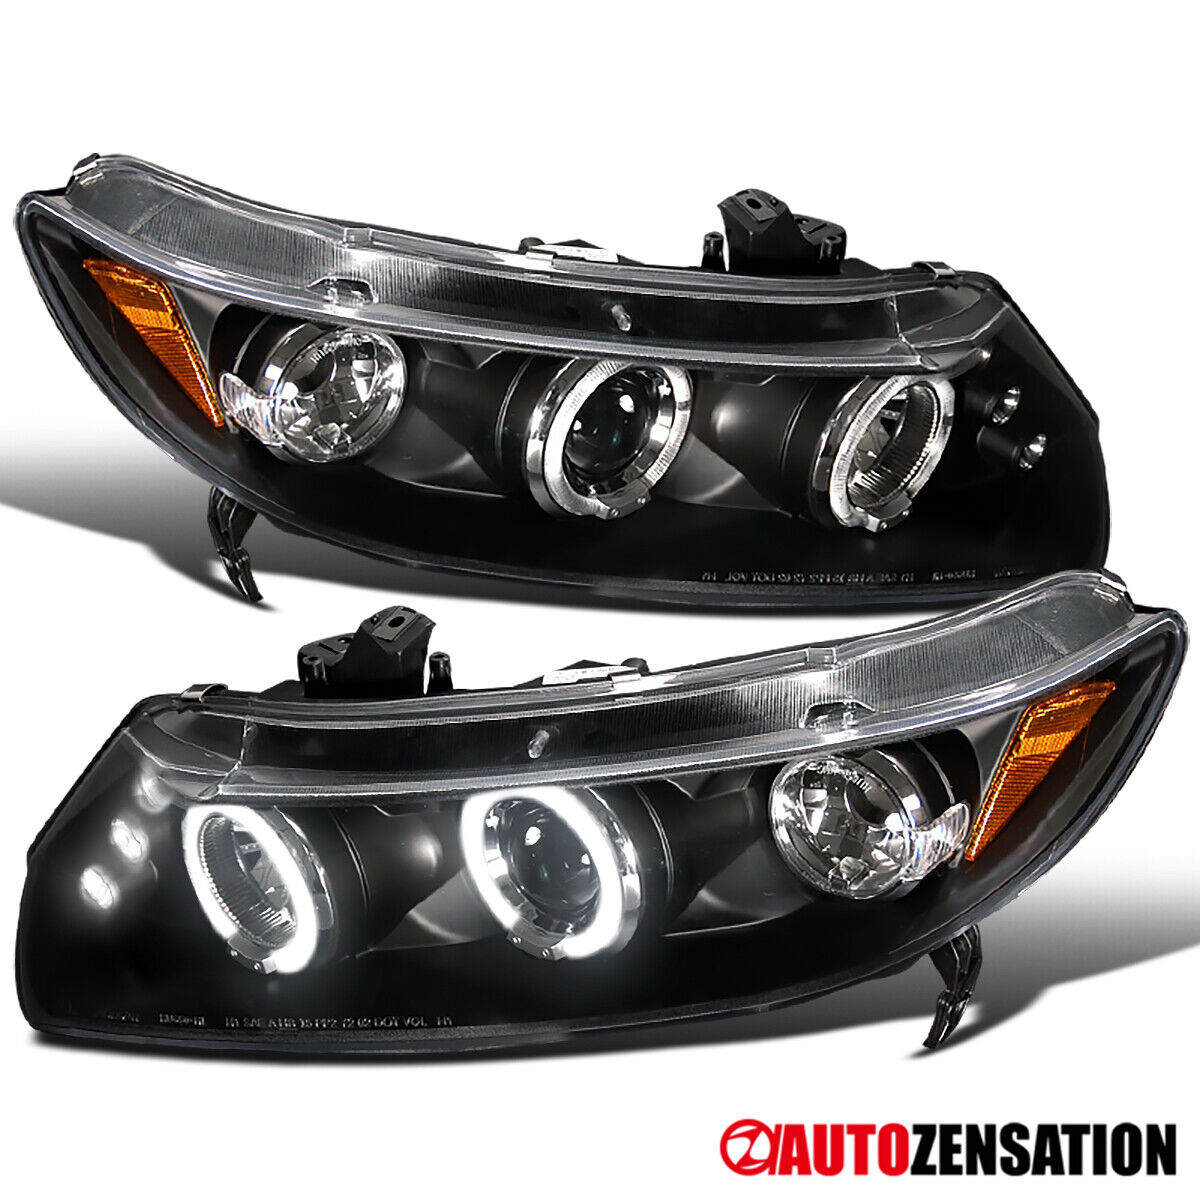 For 2006-2011 Honda Civic 2Dr Black LED Halo Projector Headlights Left & Right